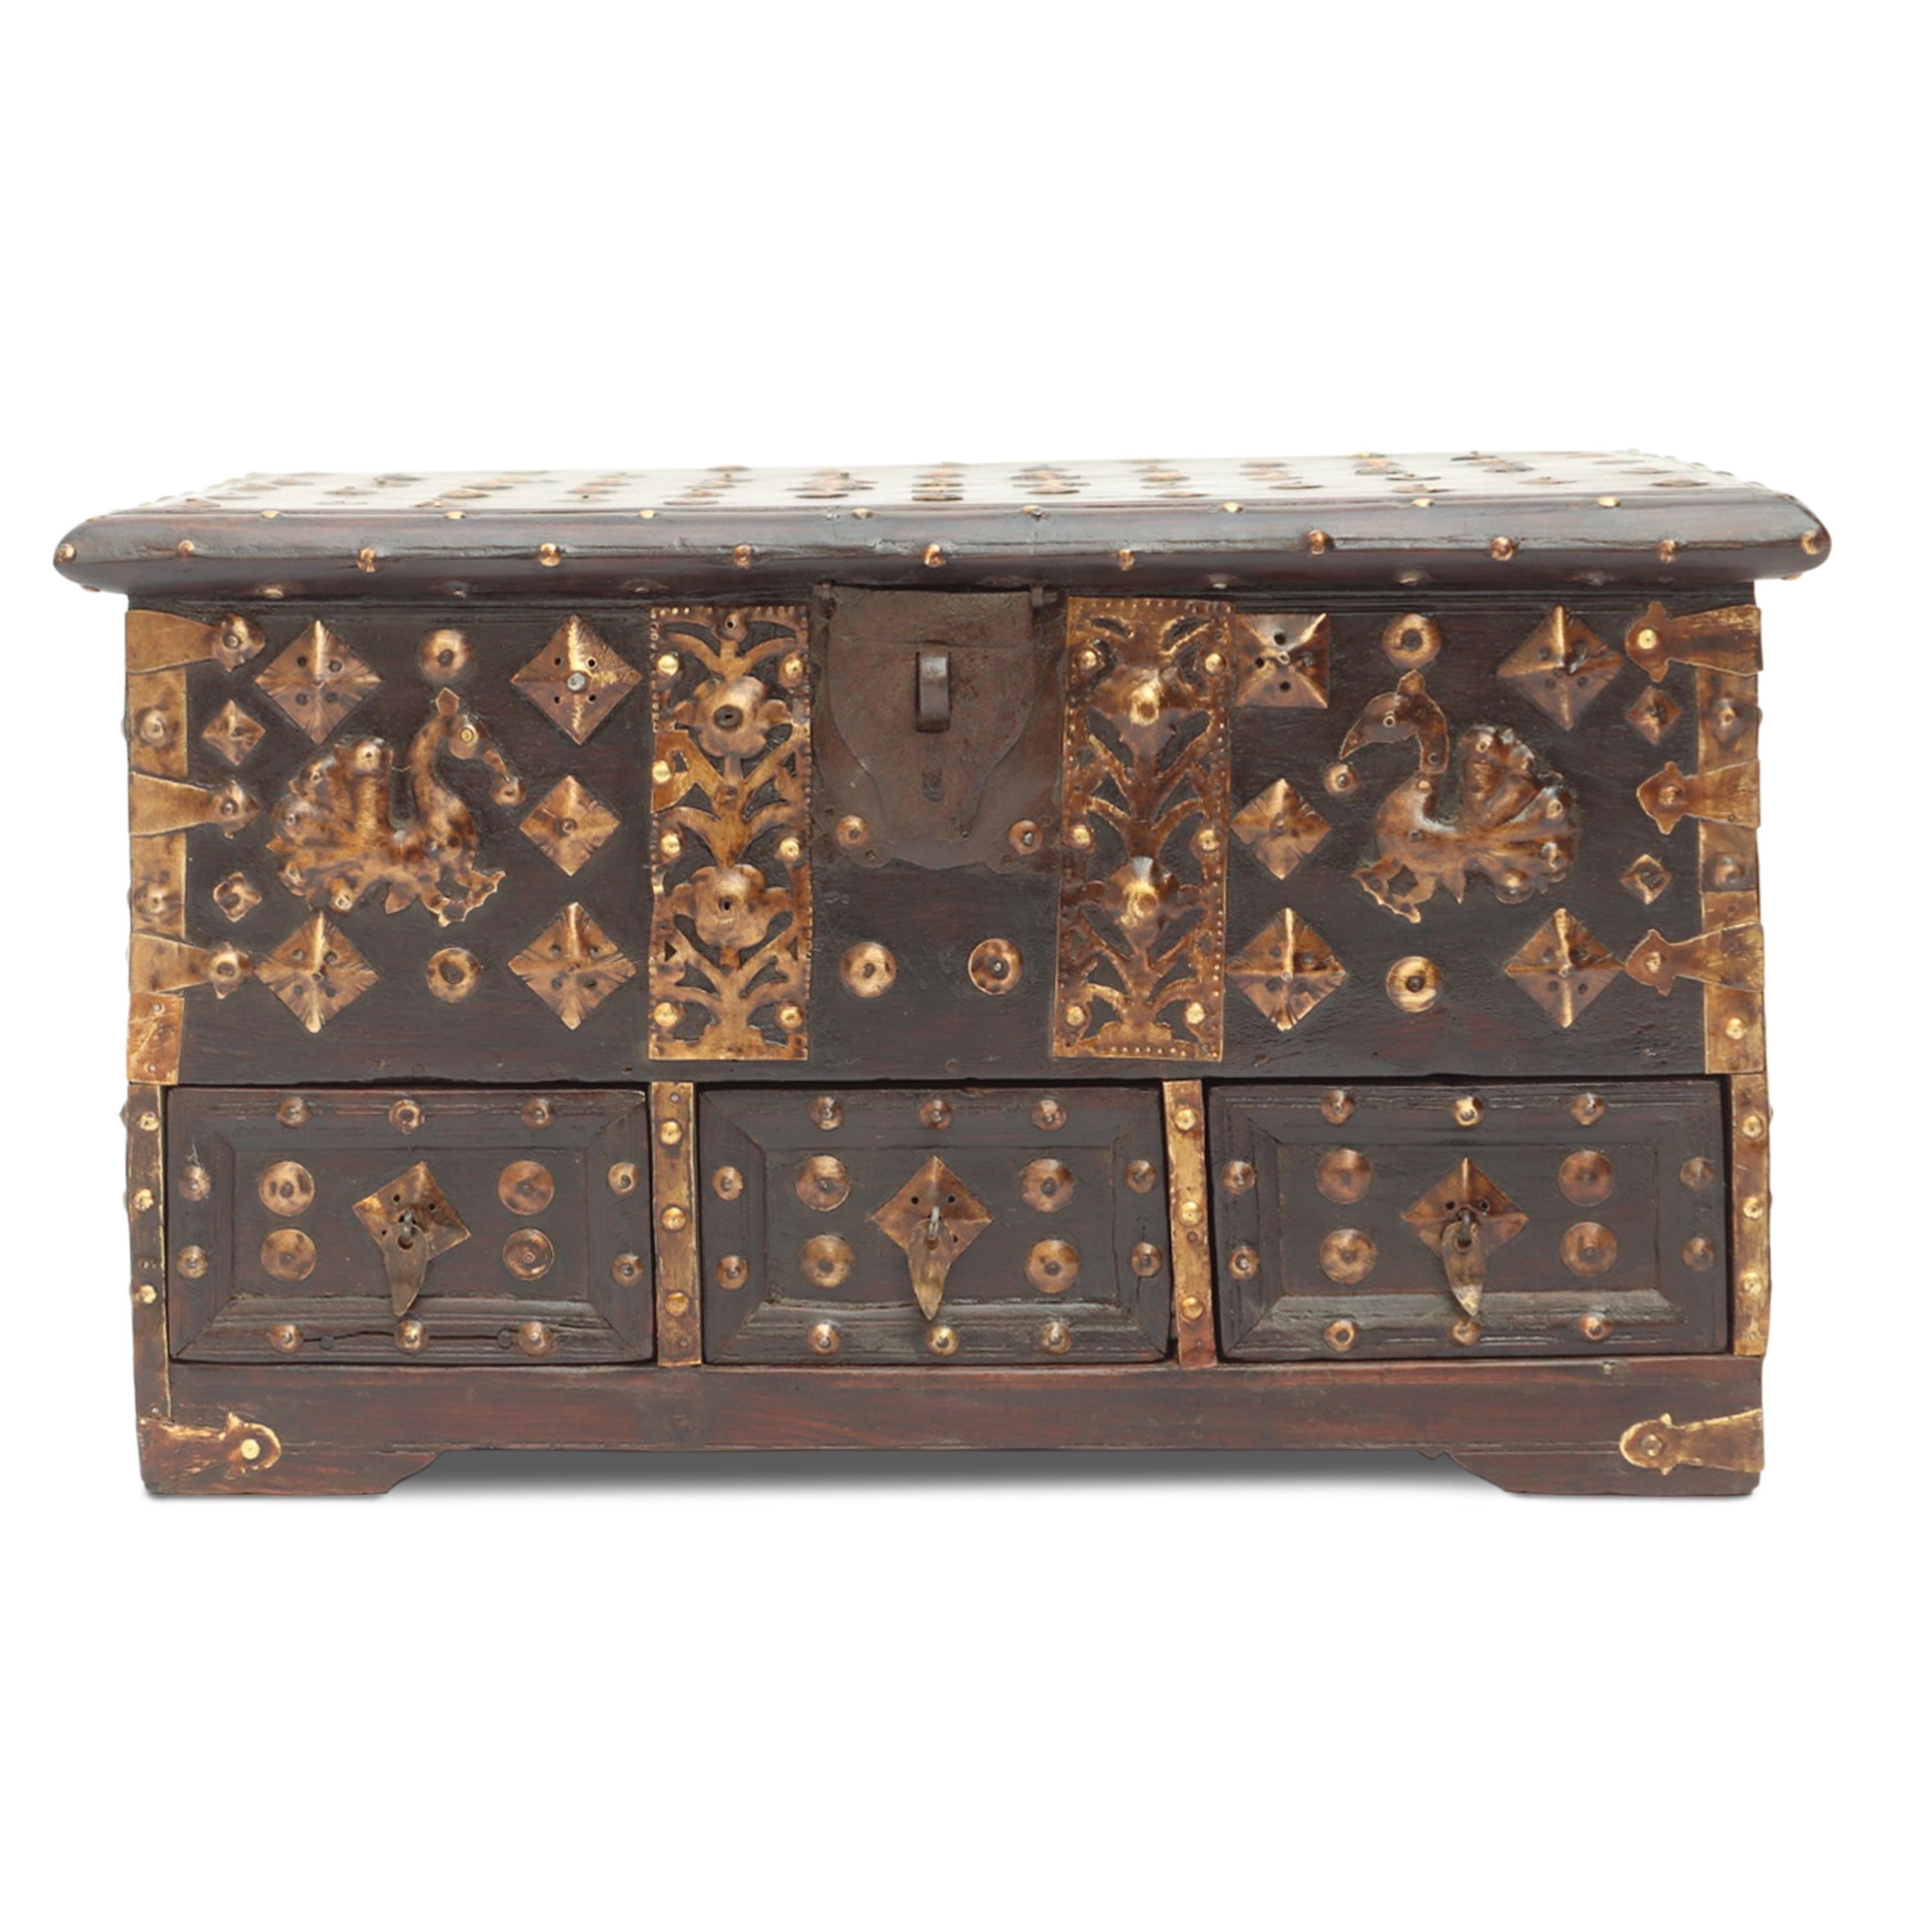 An exquisite 18th-century rosewood box, adorned with brass mounts throughout, showcasing its exceptional quality and craftsmanship. The attention to detail in the woodwork and the brass mounts is evident, creating a harmonious blend of materials.